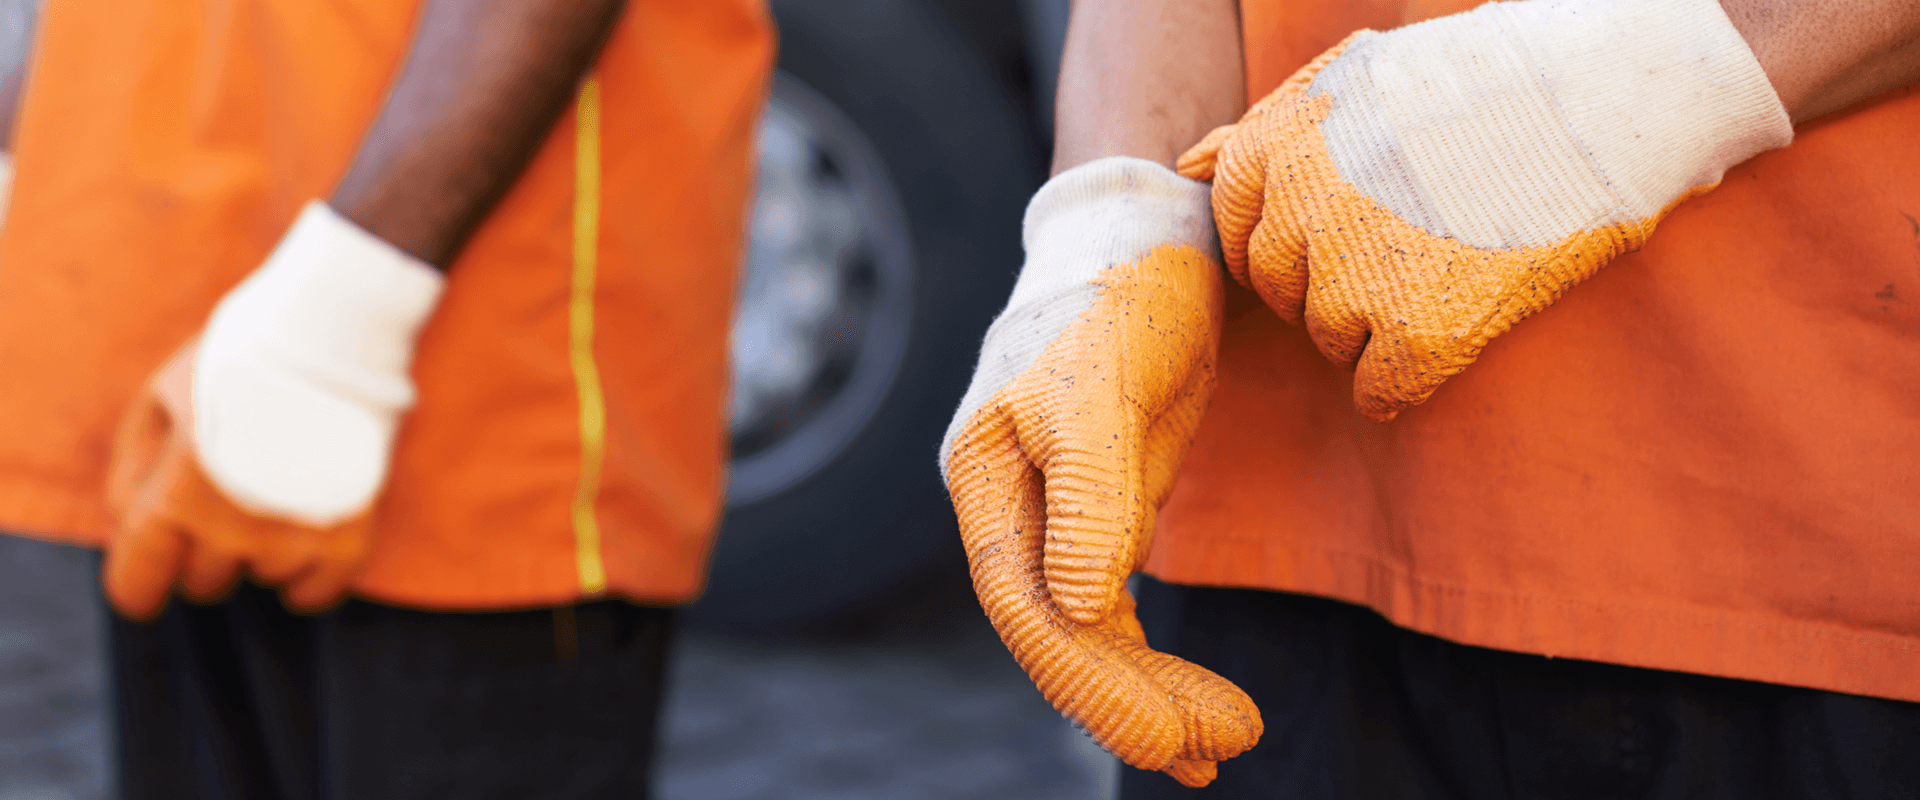 Close up shot of workers wearing safety gloves